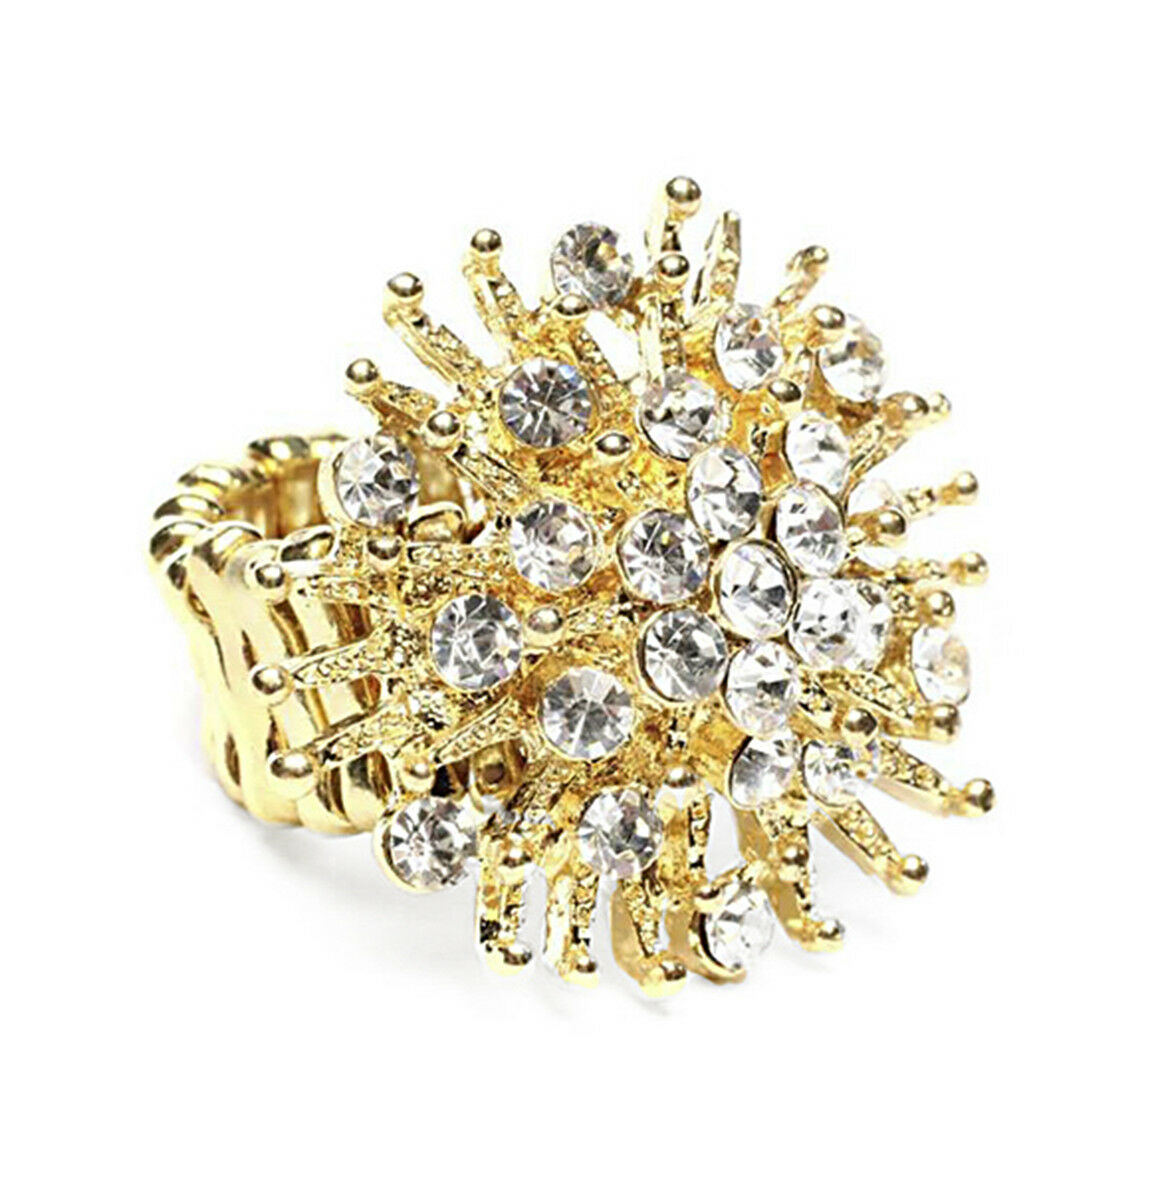 Amrita Singh Gold Crystal Snowflake Floral Stretch Cocktail Ring RC 448 NWT